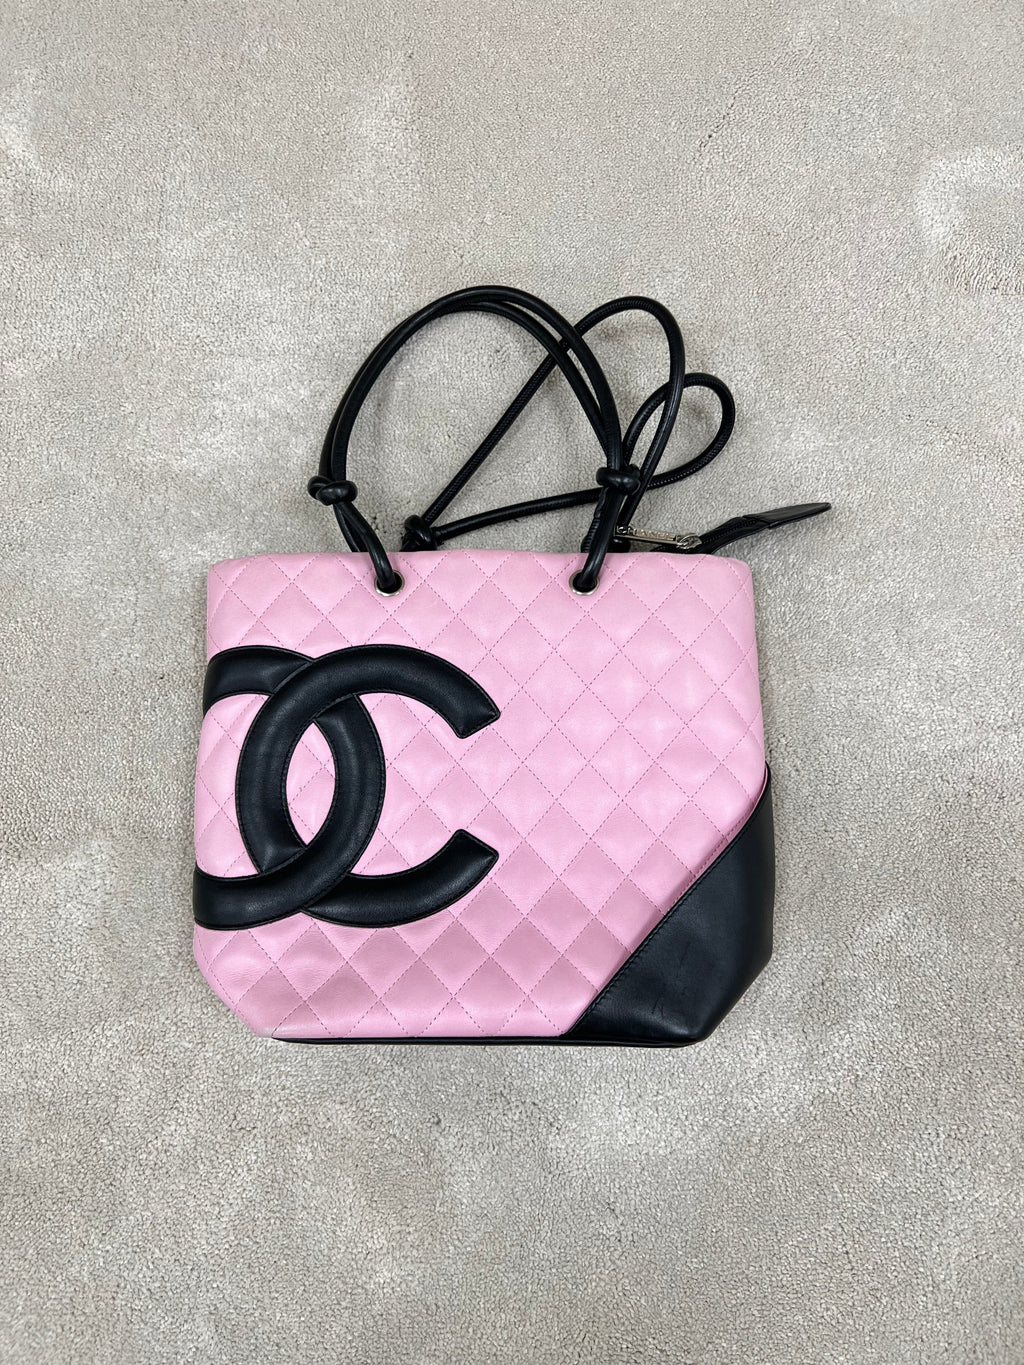 CHANEL CHANEL Cambon Small Bags & Handbags for Women, Authenticity  Guaranteed